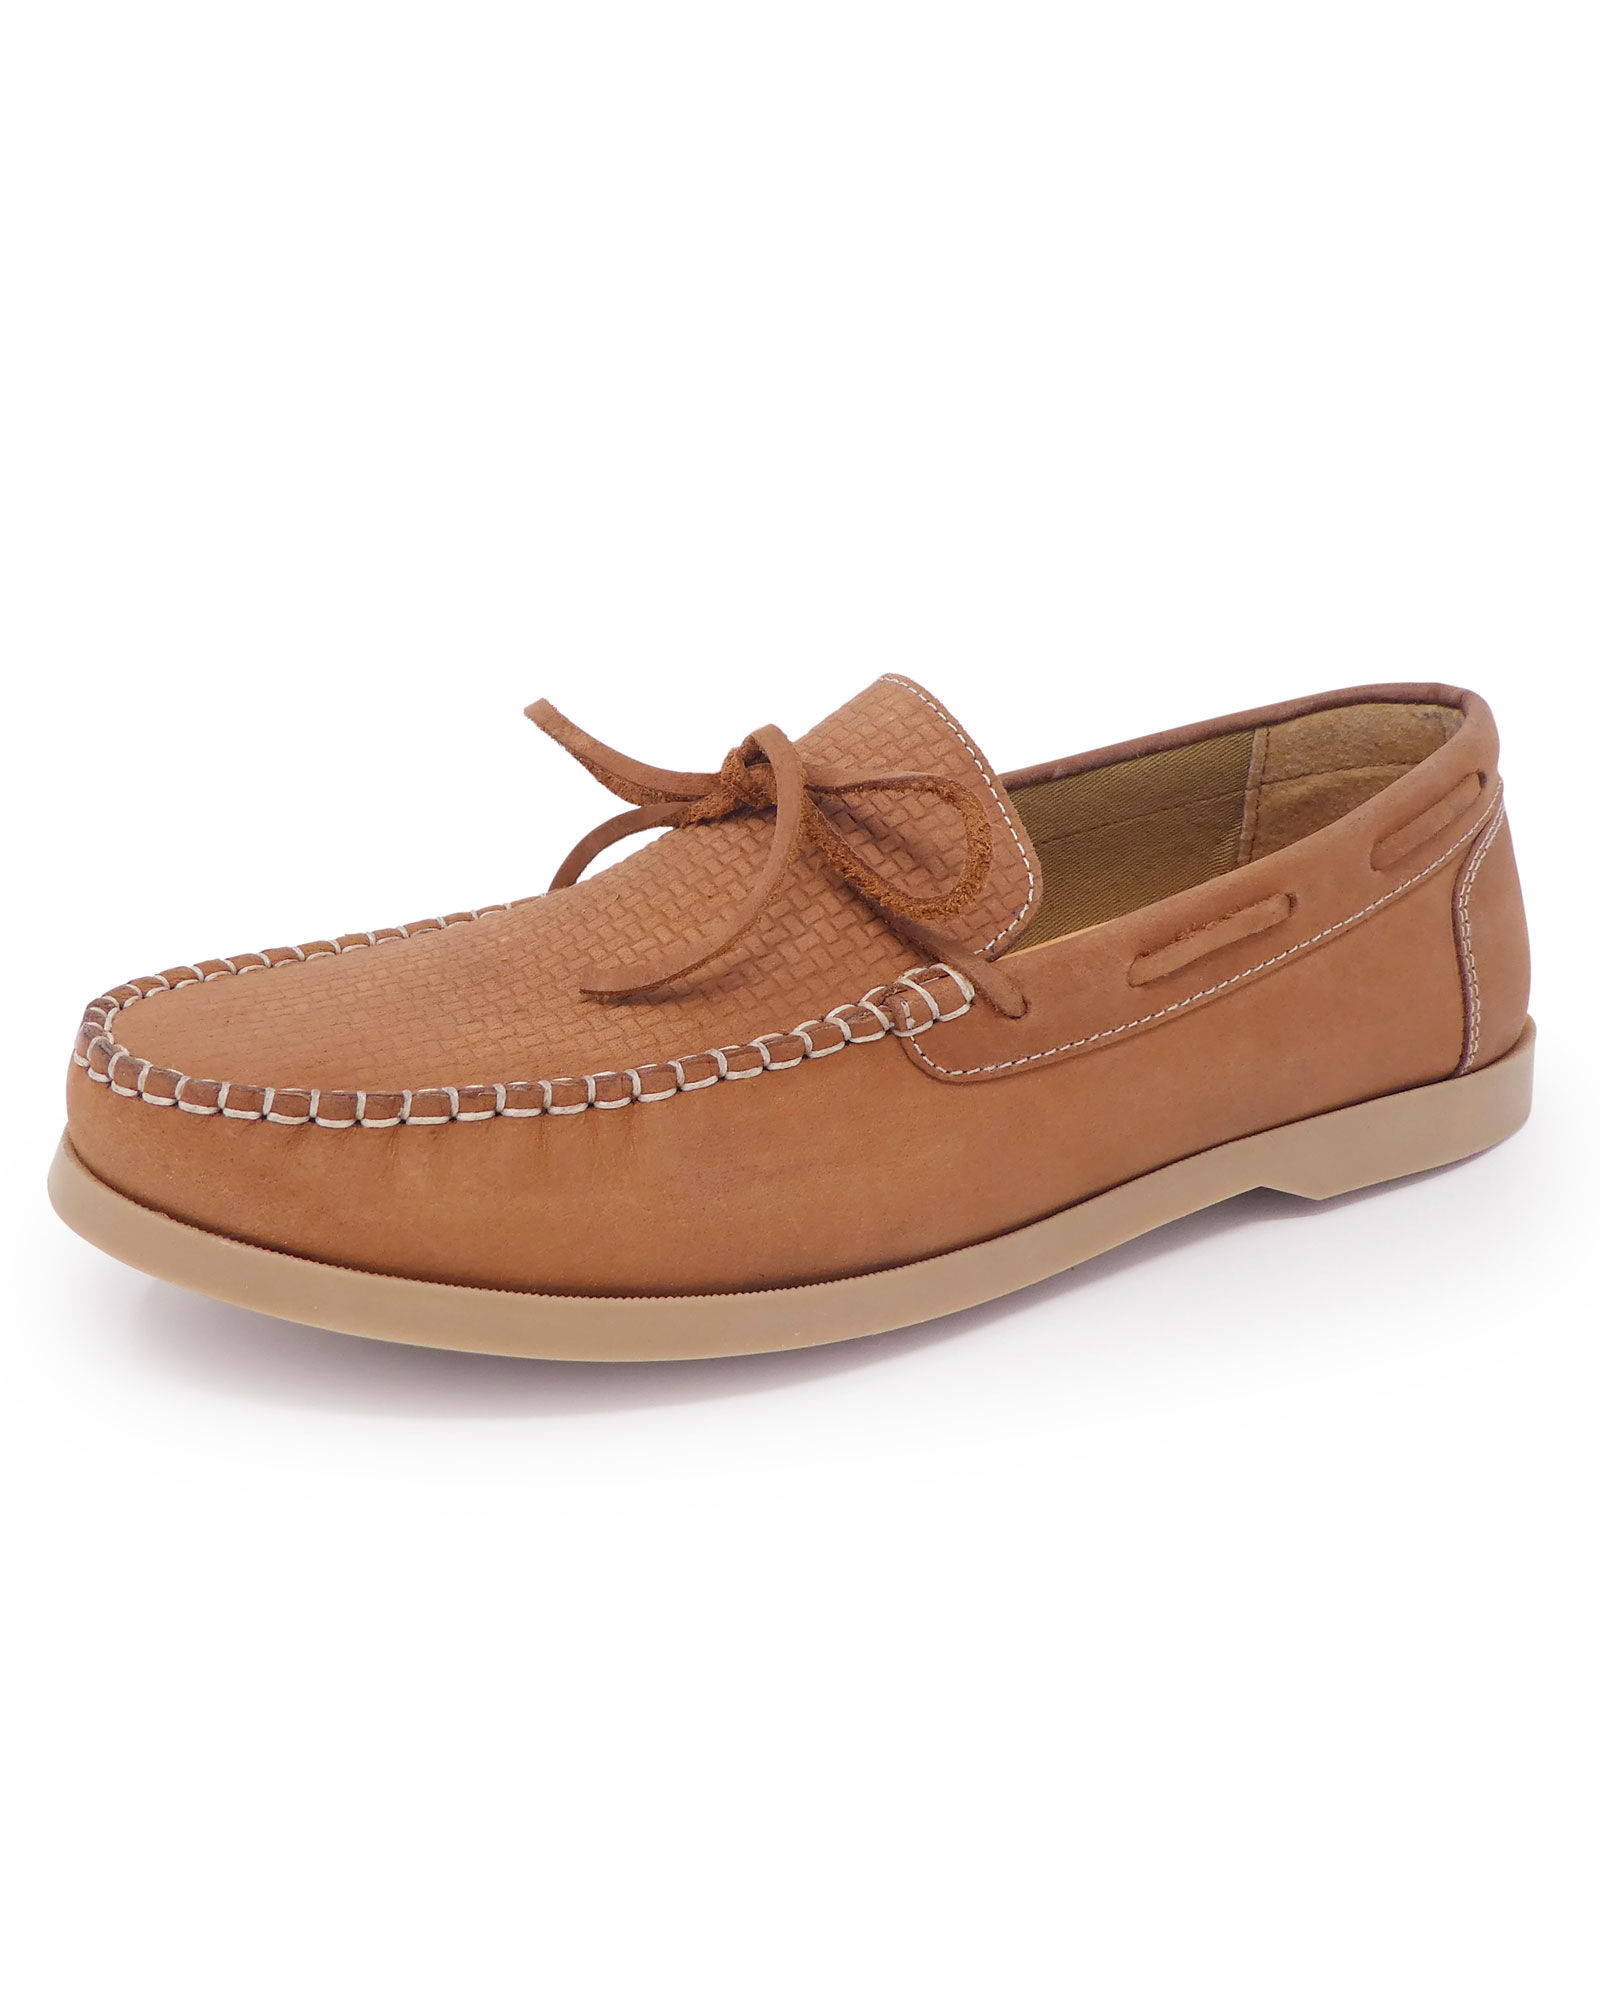 leather slip on boat shoes